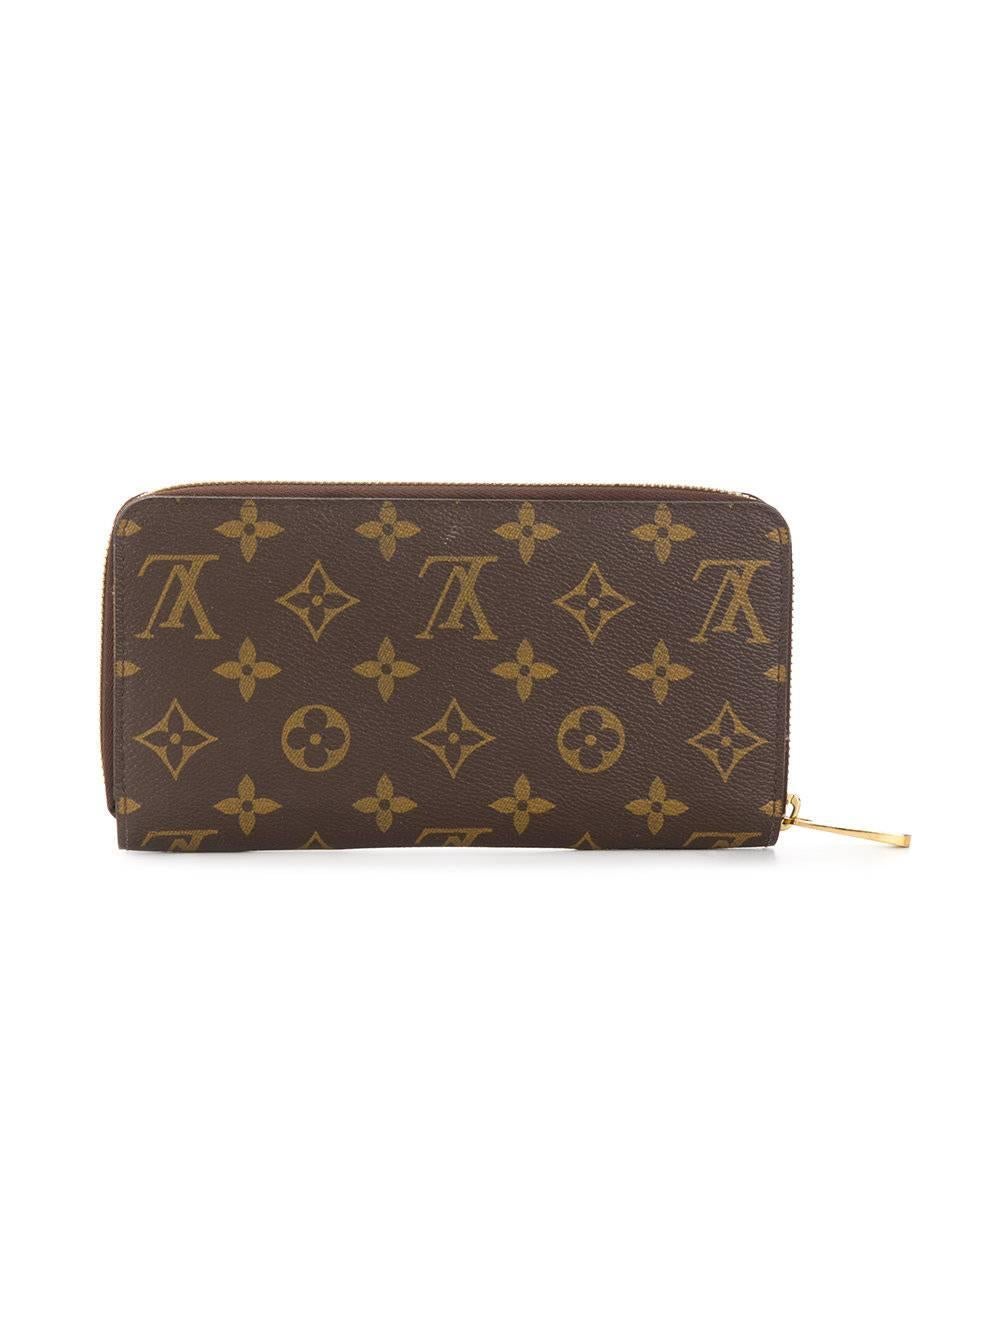 This classic monogram pattern wallet from Louis Vuitton features a zipped top accented by gold-tone hardware and opens to reveal two internal compartments, including an internal slip pocket, a coin pocket and multiple card slots.

Colour: